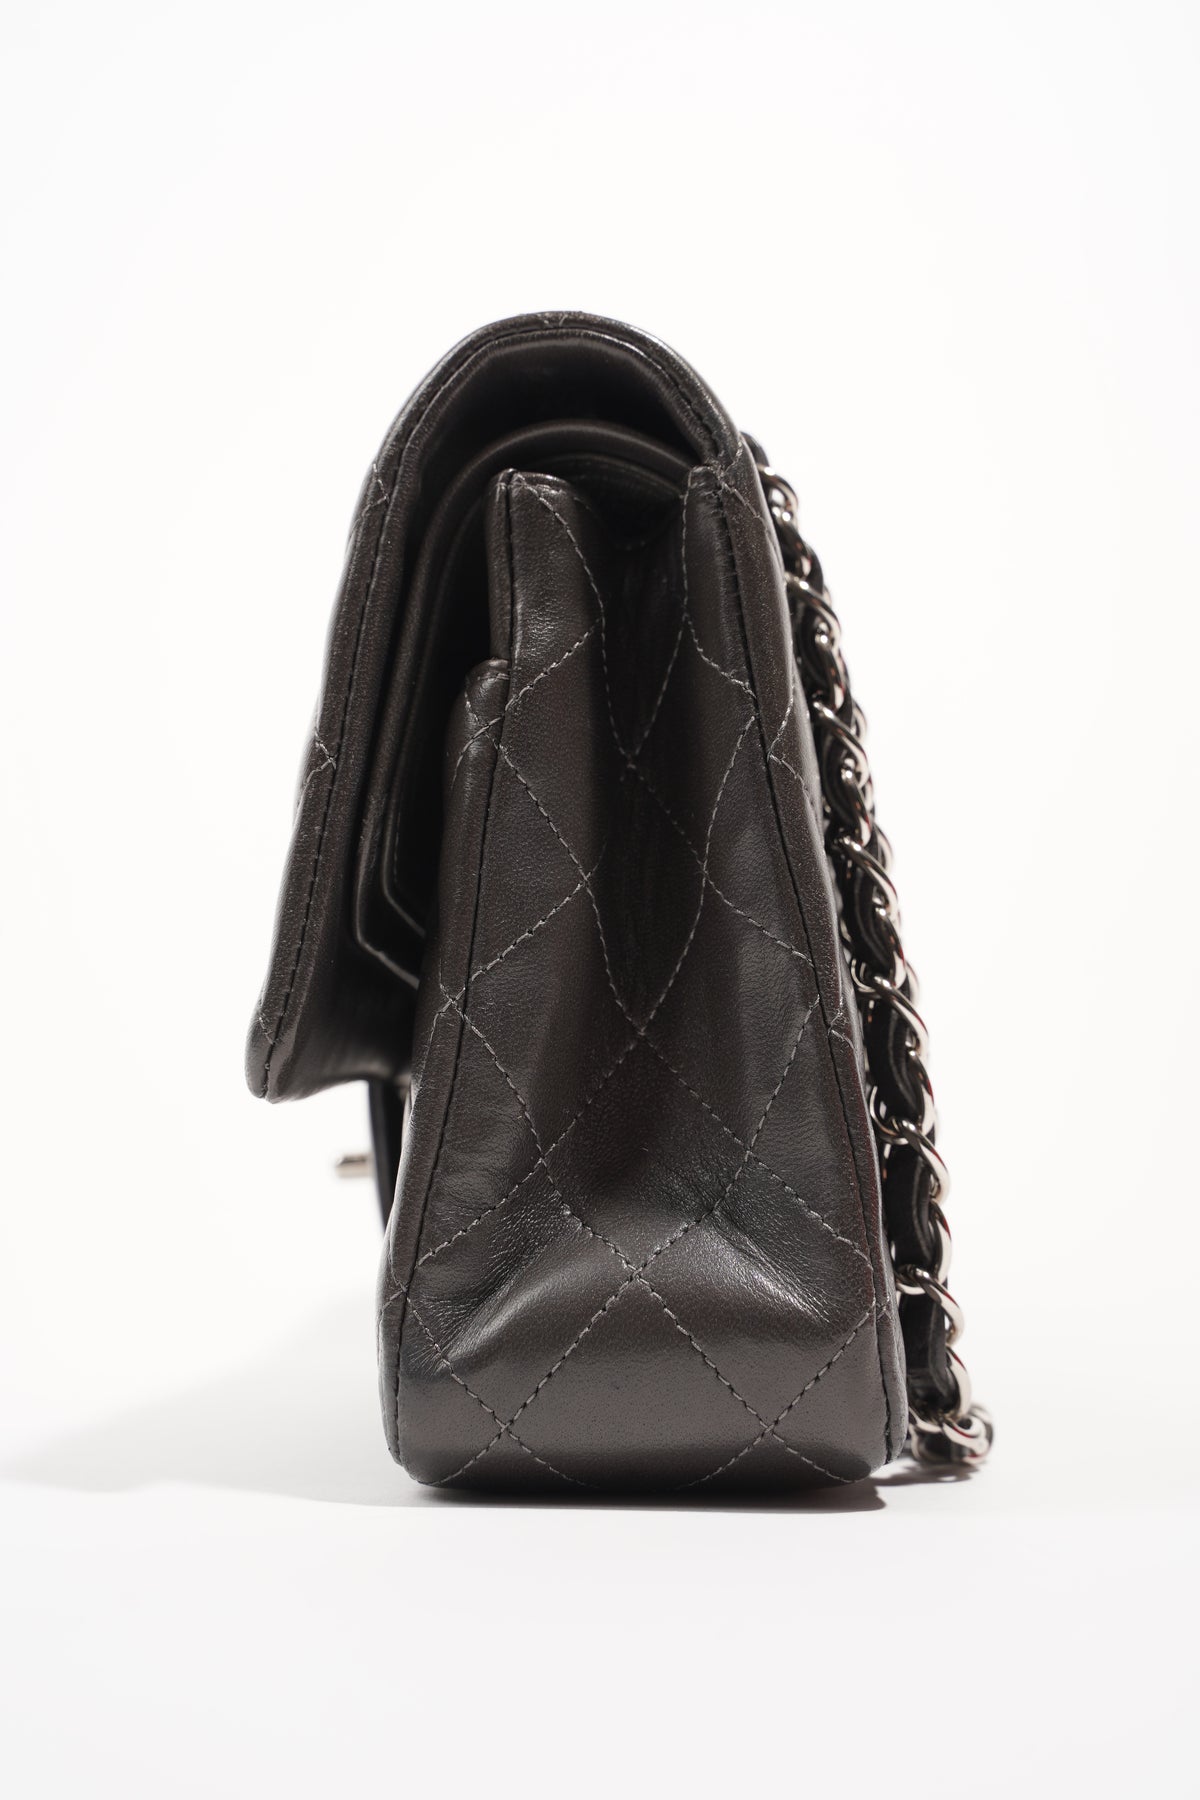 Chanel XXL Travel Flap Bag, Black Caviar Leather, Ruthenium Harwdware,  Preowned in Dustbag